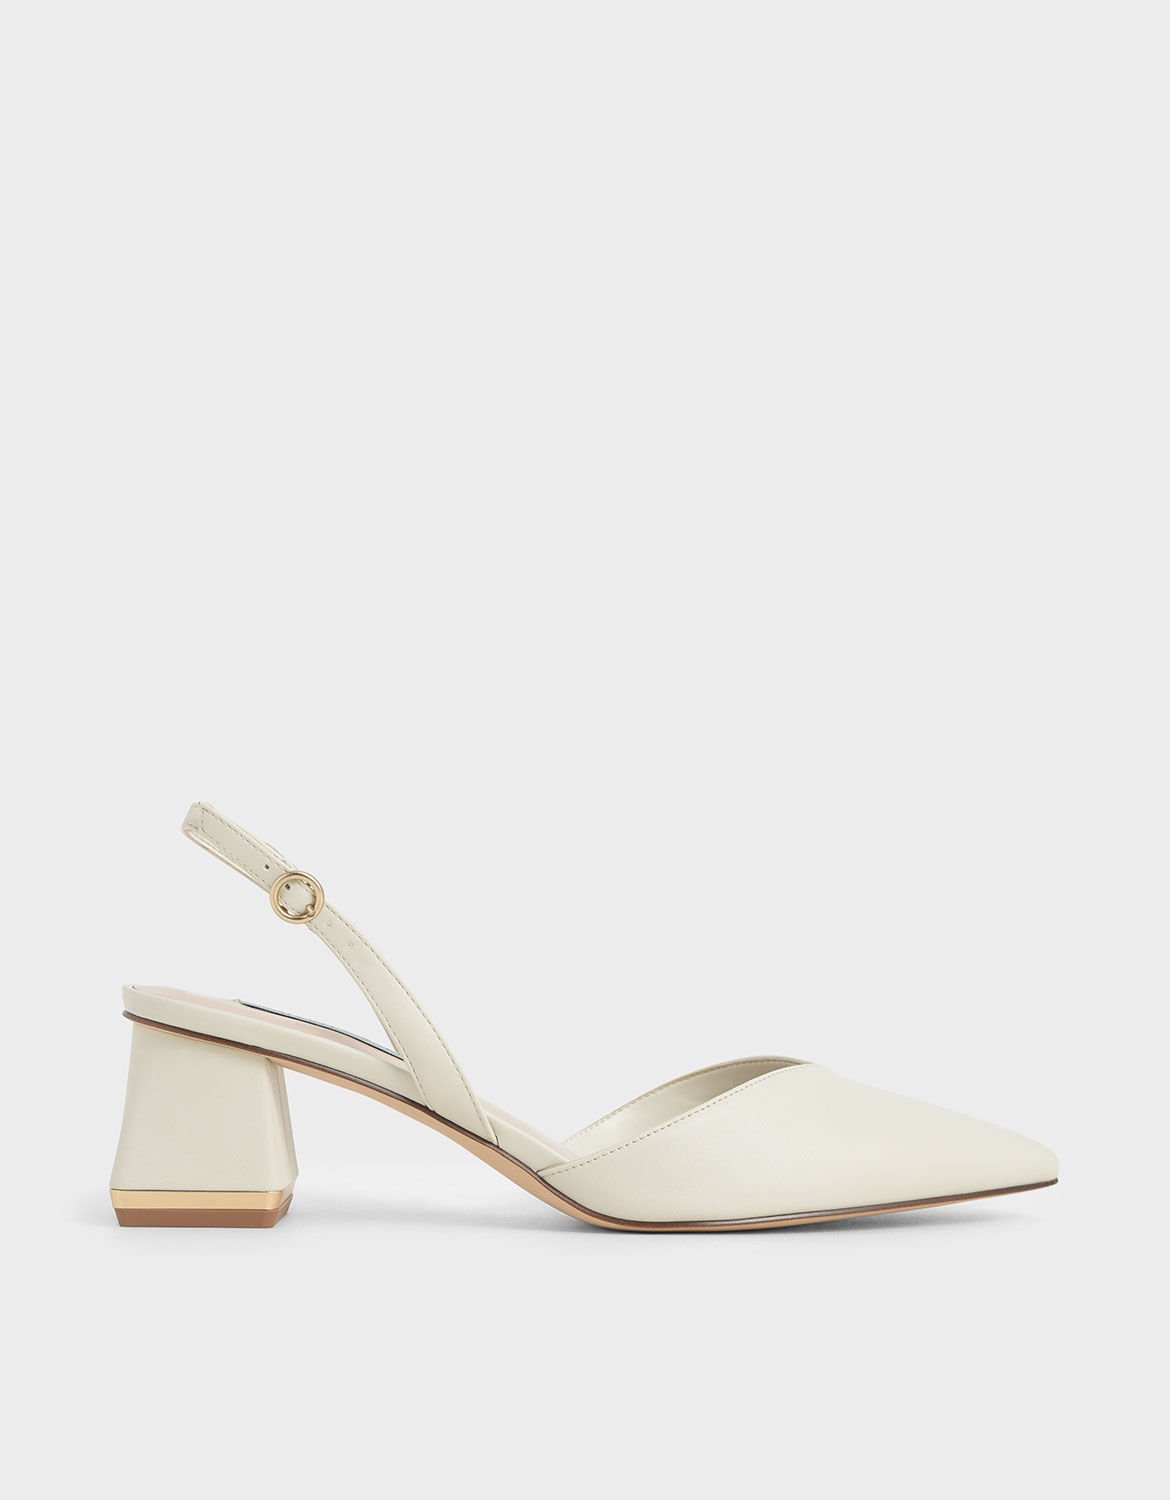 Charles & Keith Women's Trapeze Heel Slingback Pumps